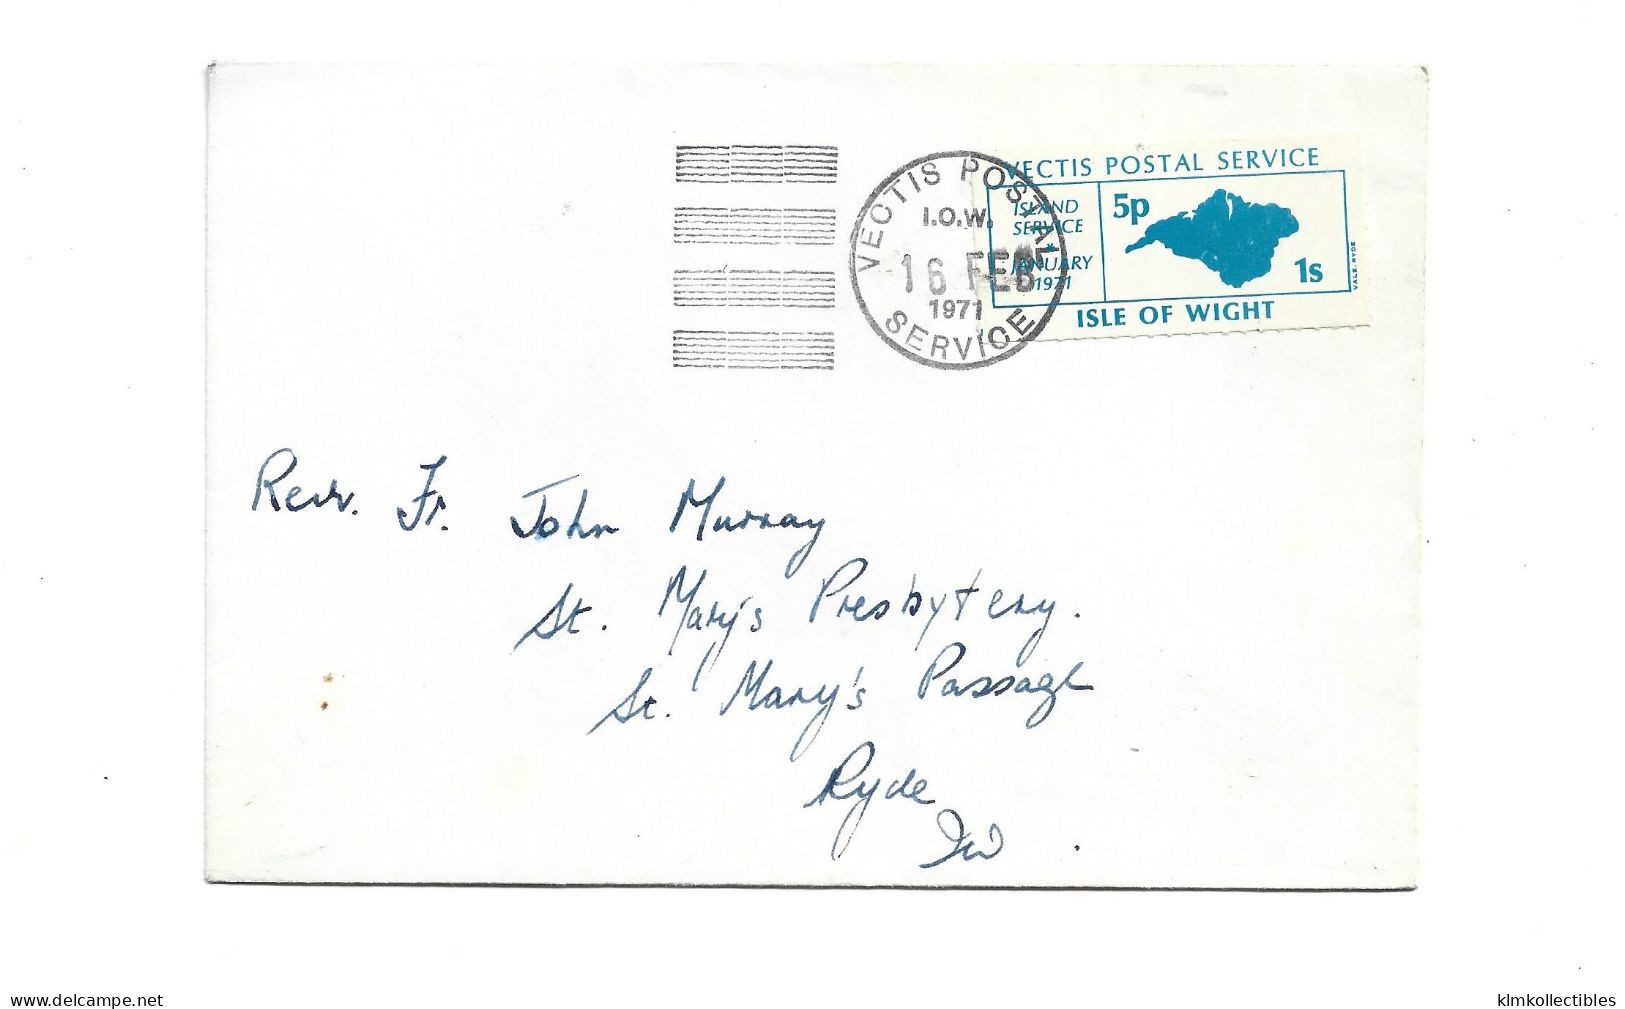 GREAT BRITAIN UNITED KINGDOM UK ENGLAND - ISLE OF WIGHT LABEL & POSTMARK & VECTIS POSTAL SERVICE ISLAND SERVICE - Local Issues